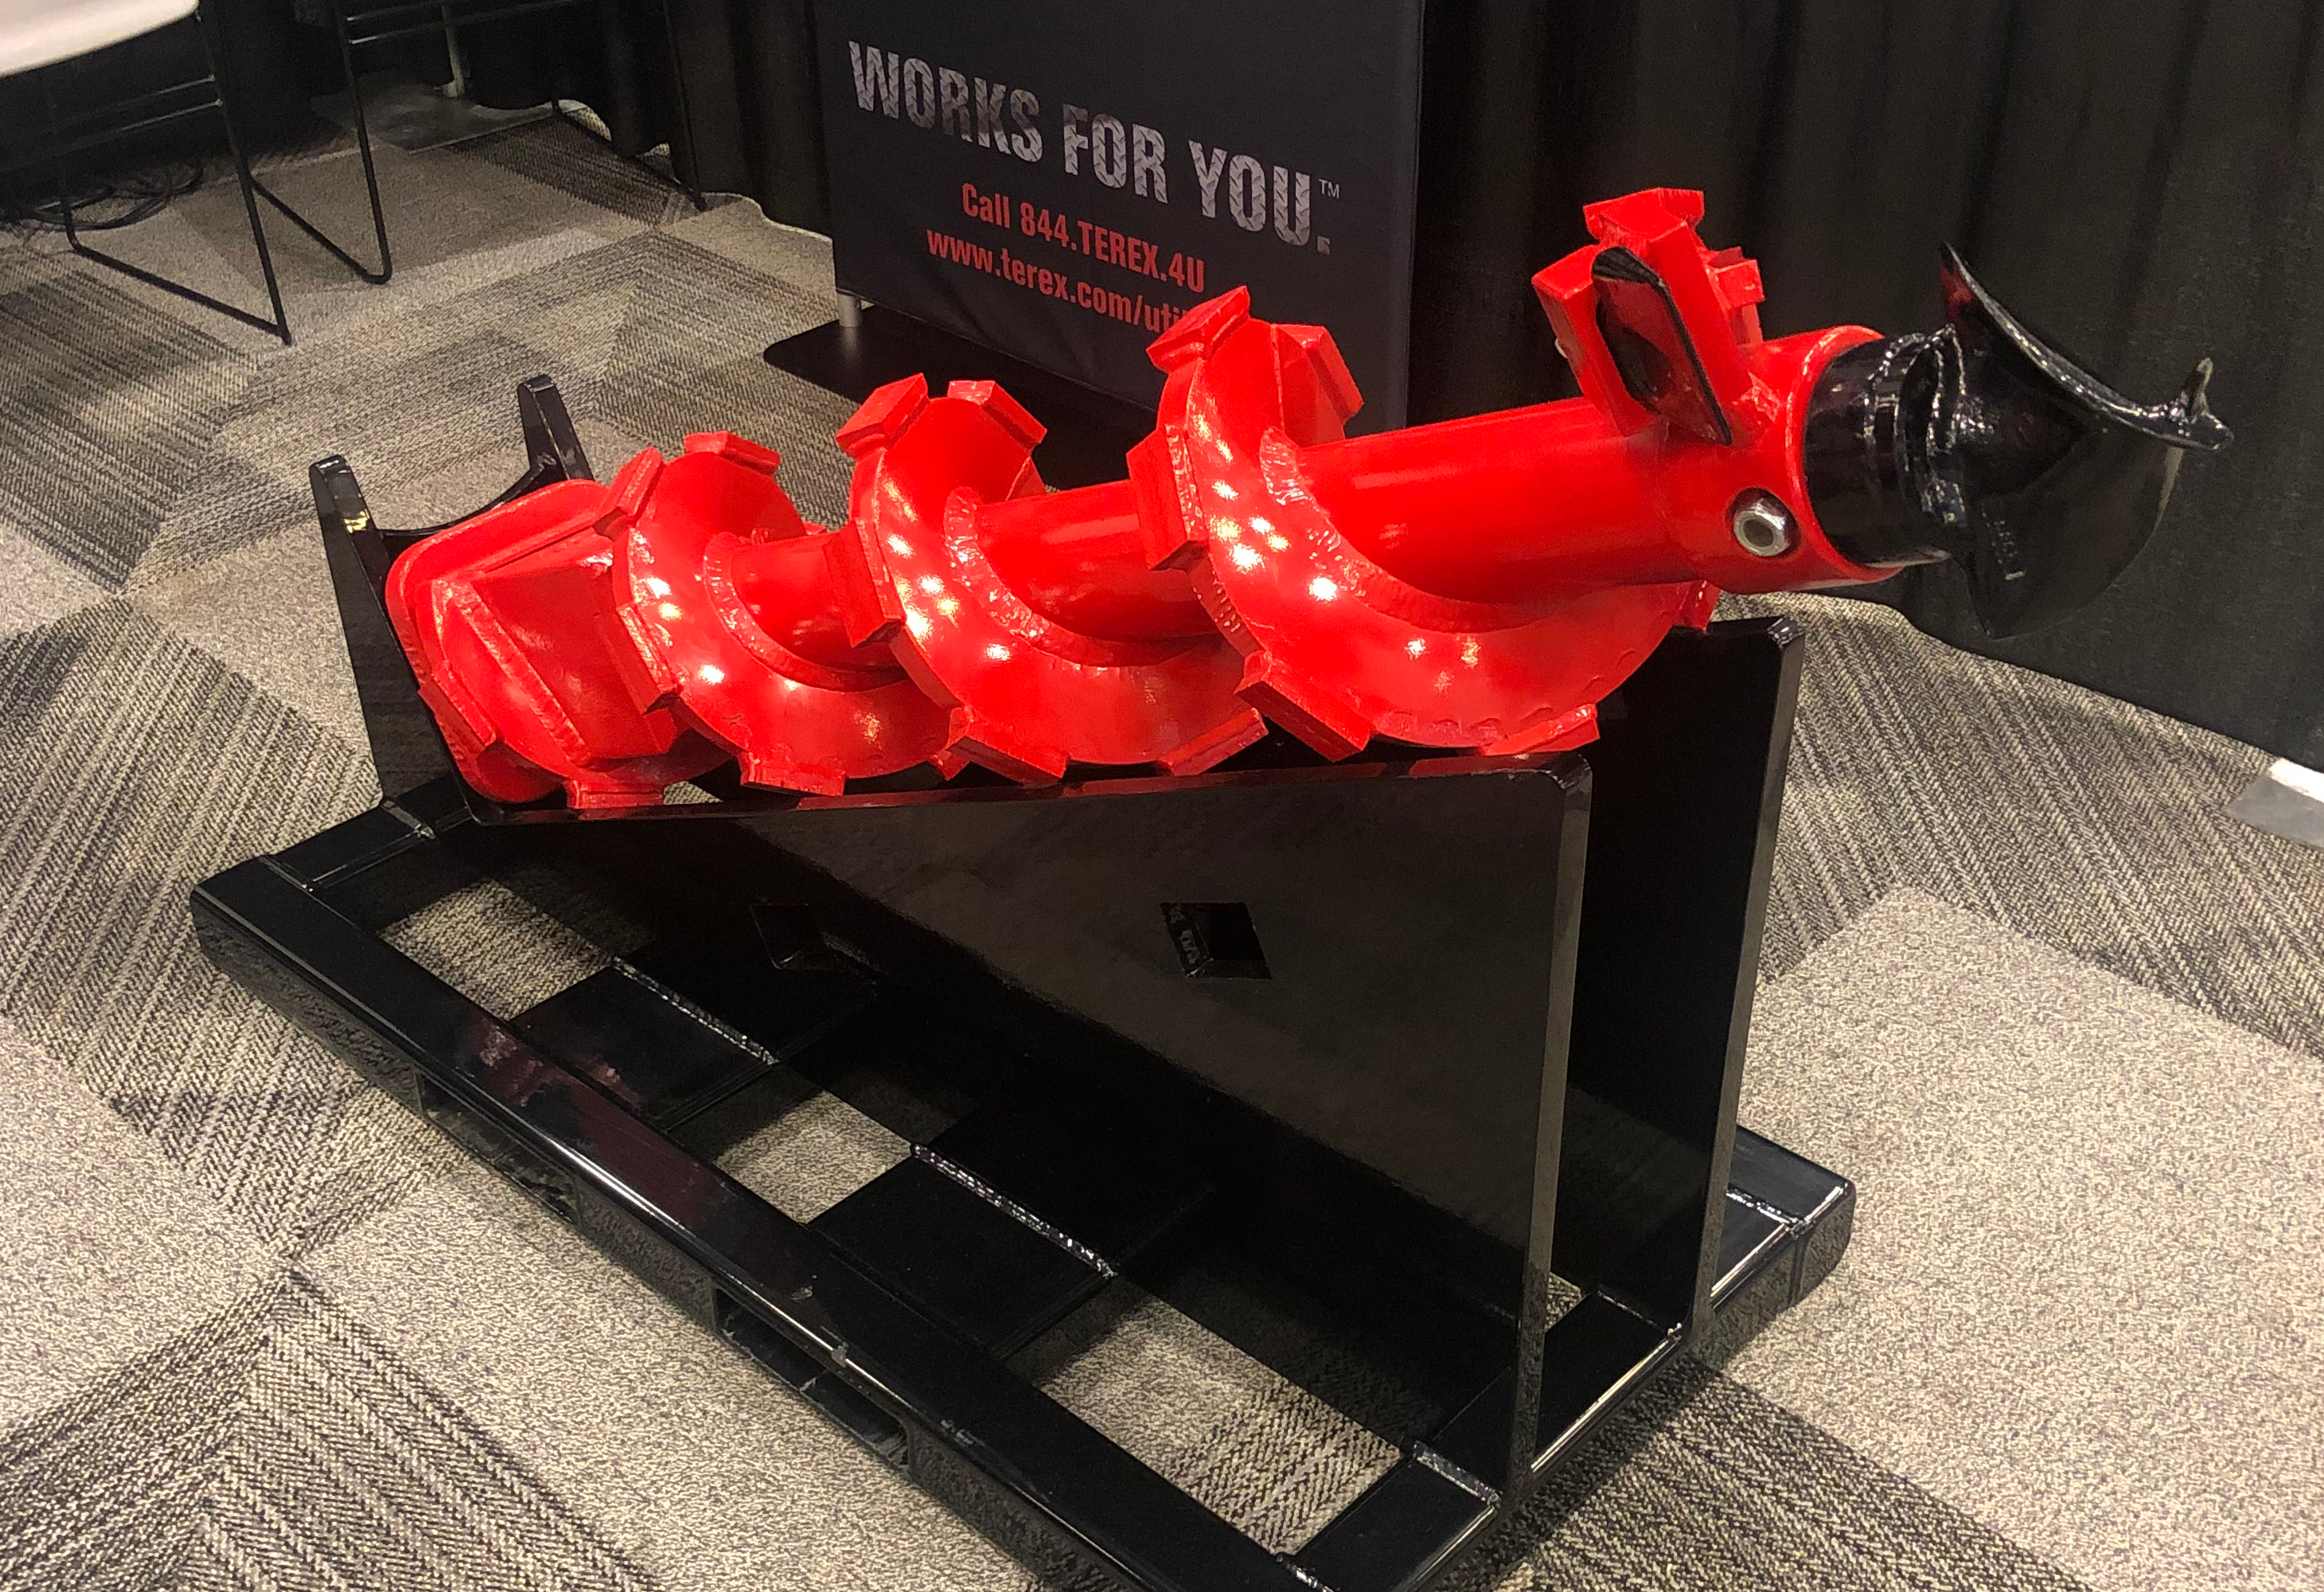 Foundation High Production Auger makes its debut at IFCEE.